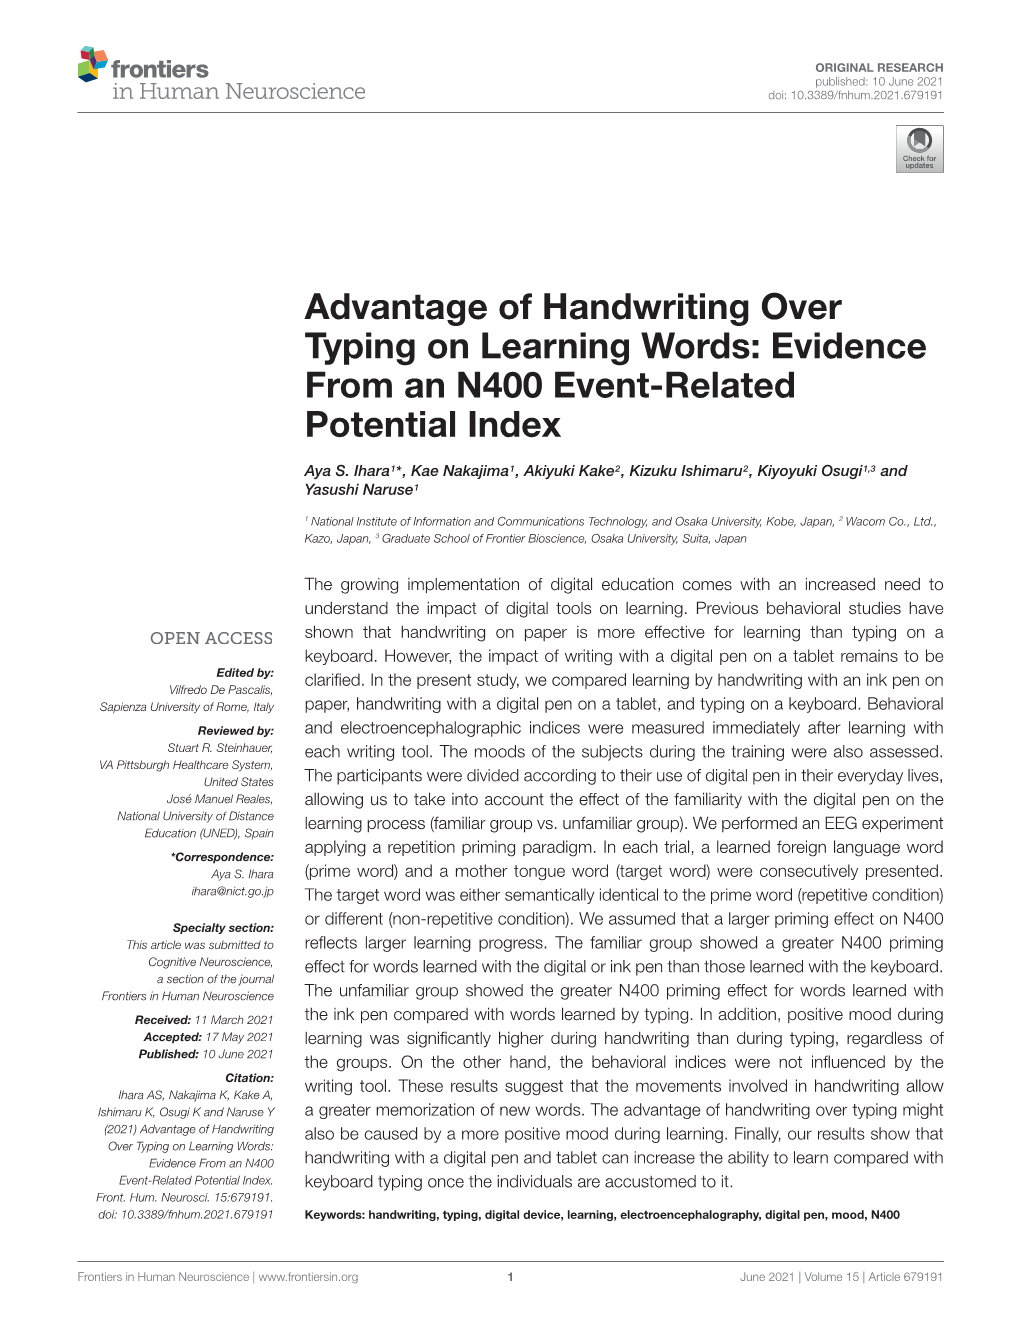 Advantage of Handwriting Over Typing on Learning Words: Evidence from an N400 Event-Related Potential Index